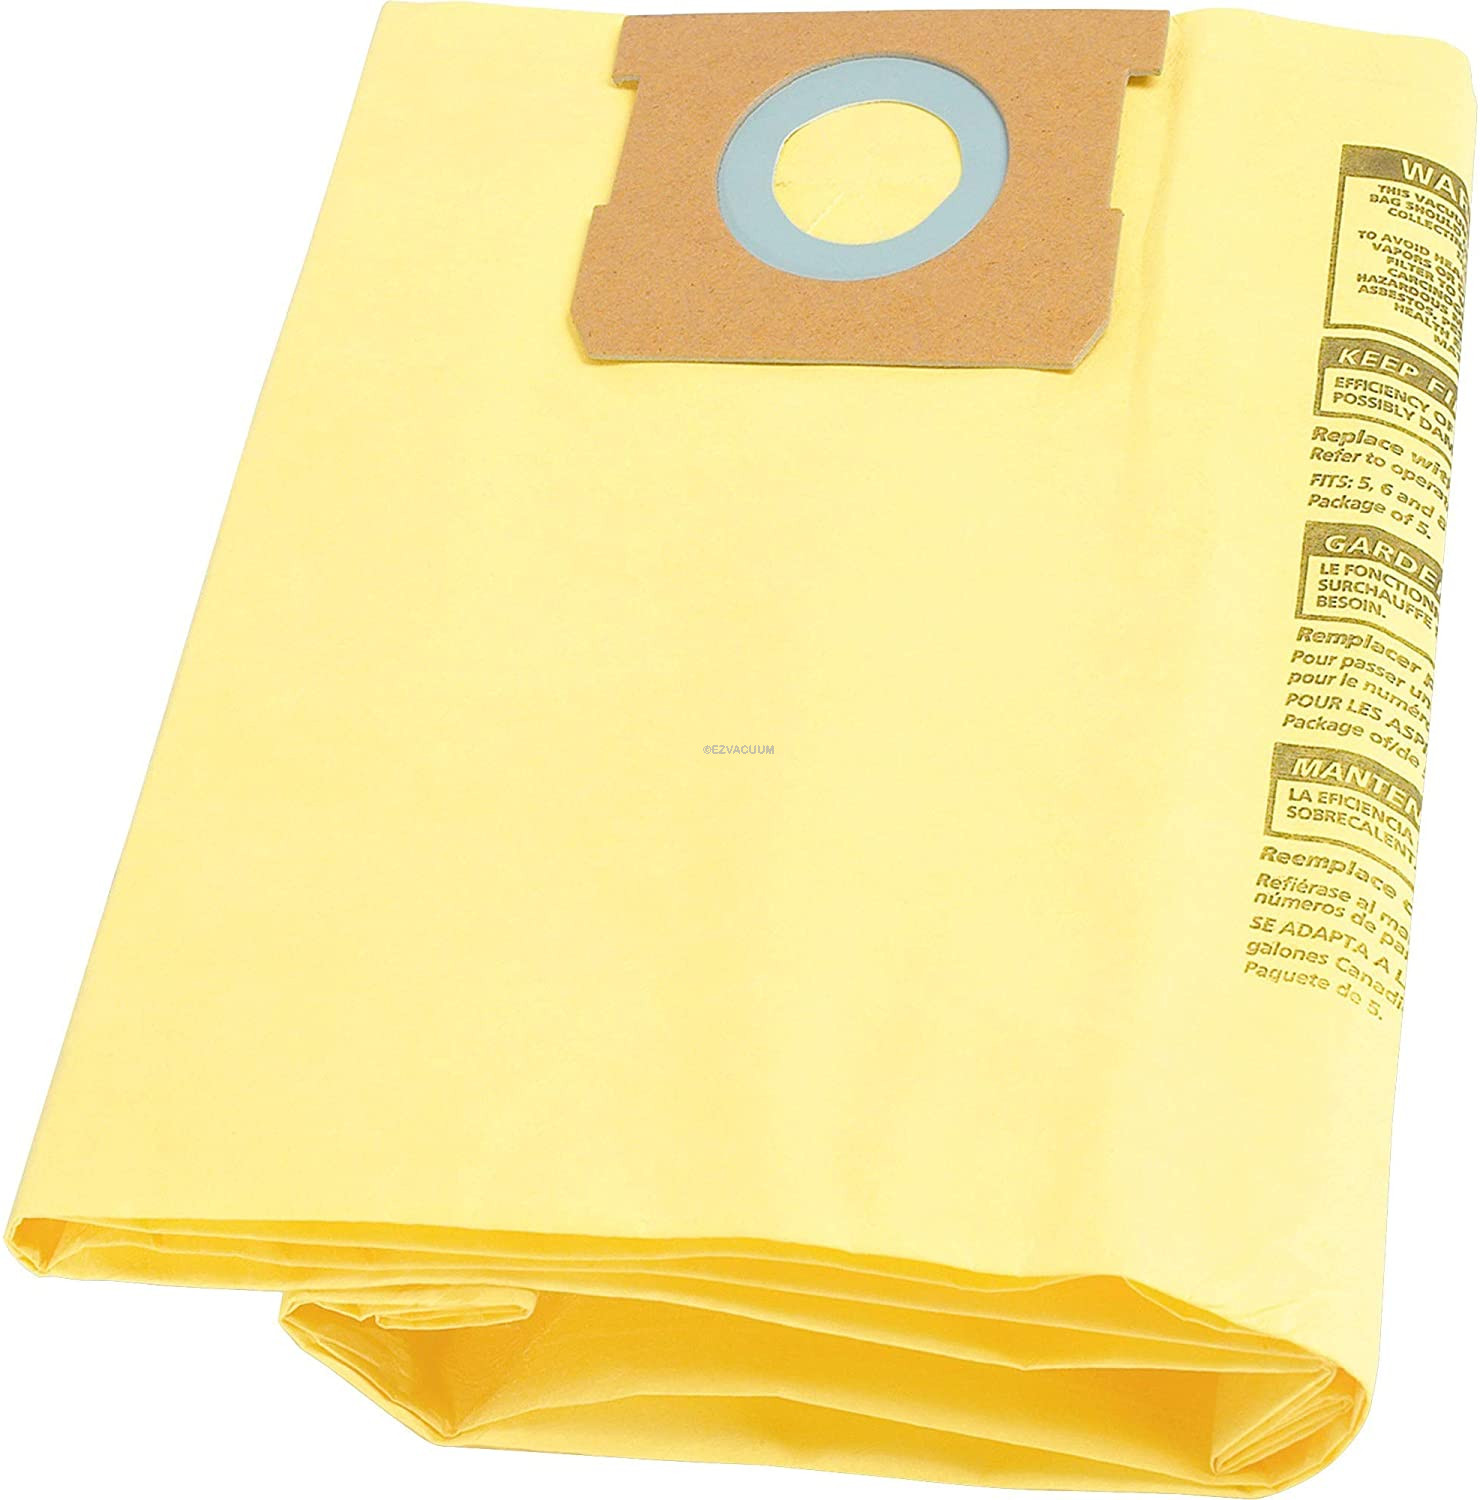 Part #90671 Tomkity 10 Packs Type H 9067100 Vacuum Bags Replacement for 5-8 Gallon Vacuum 